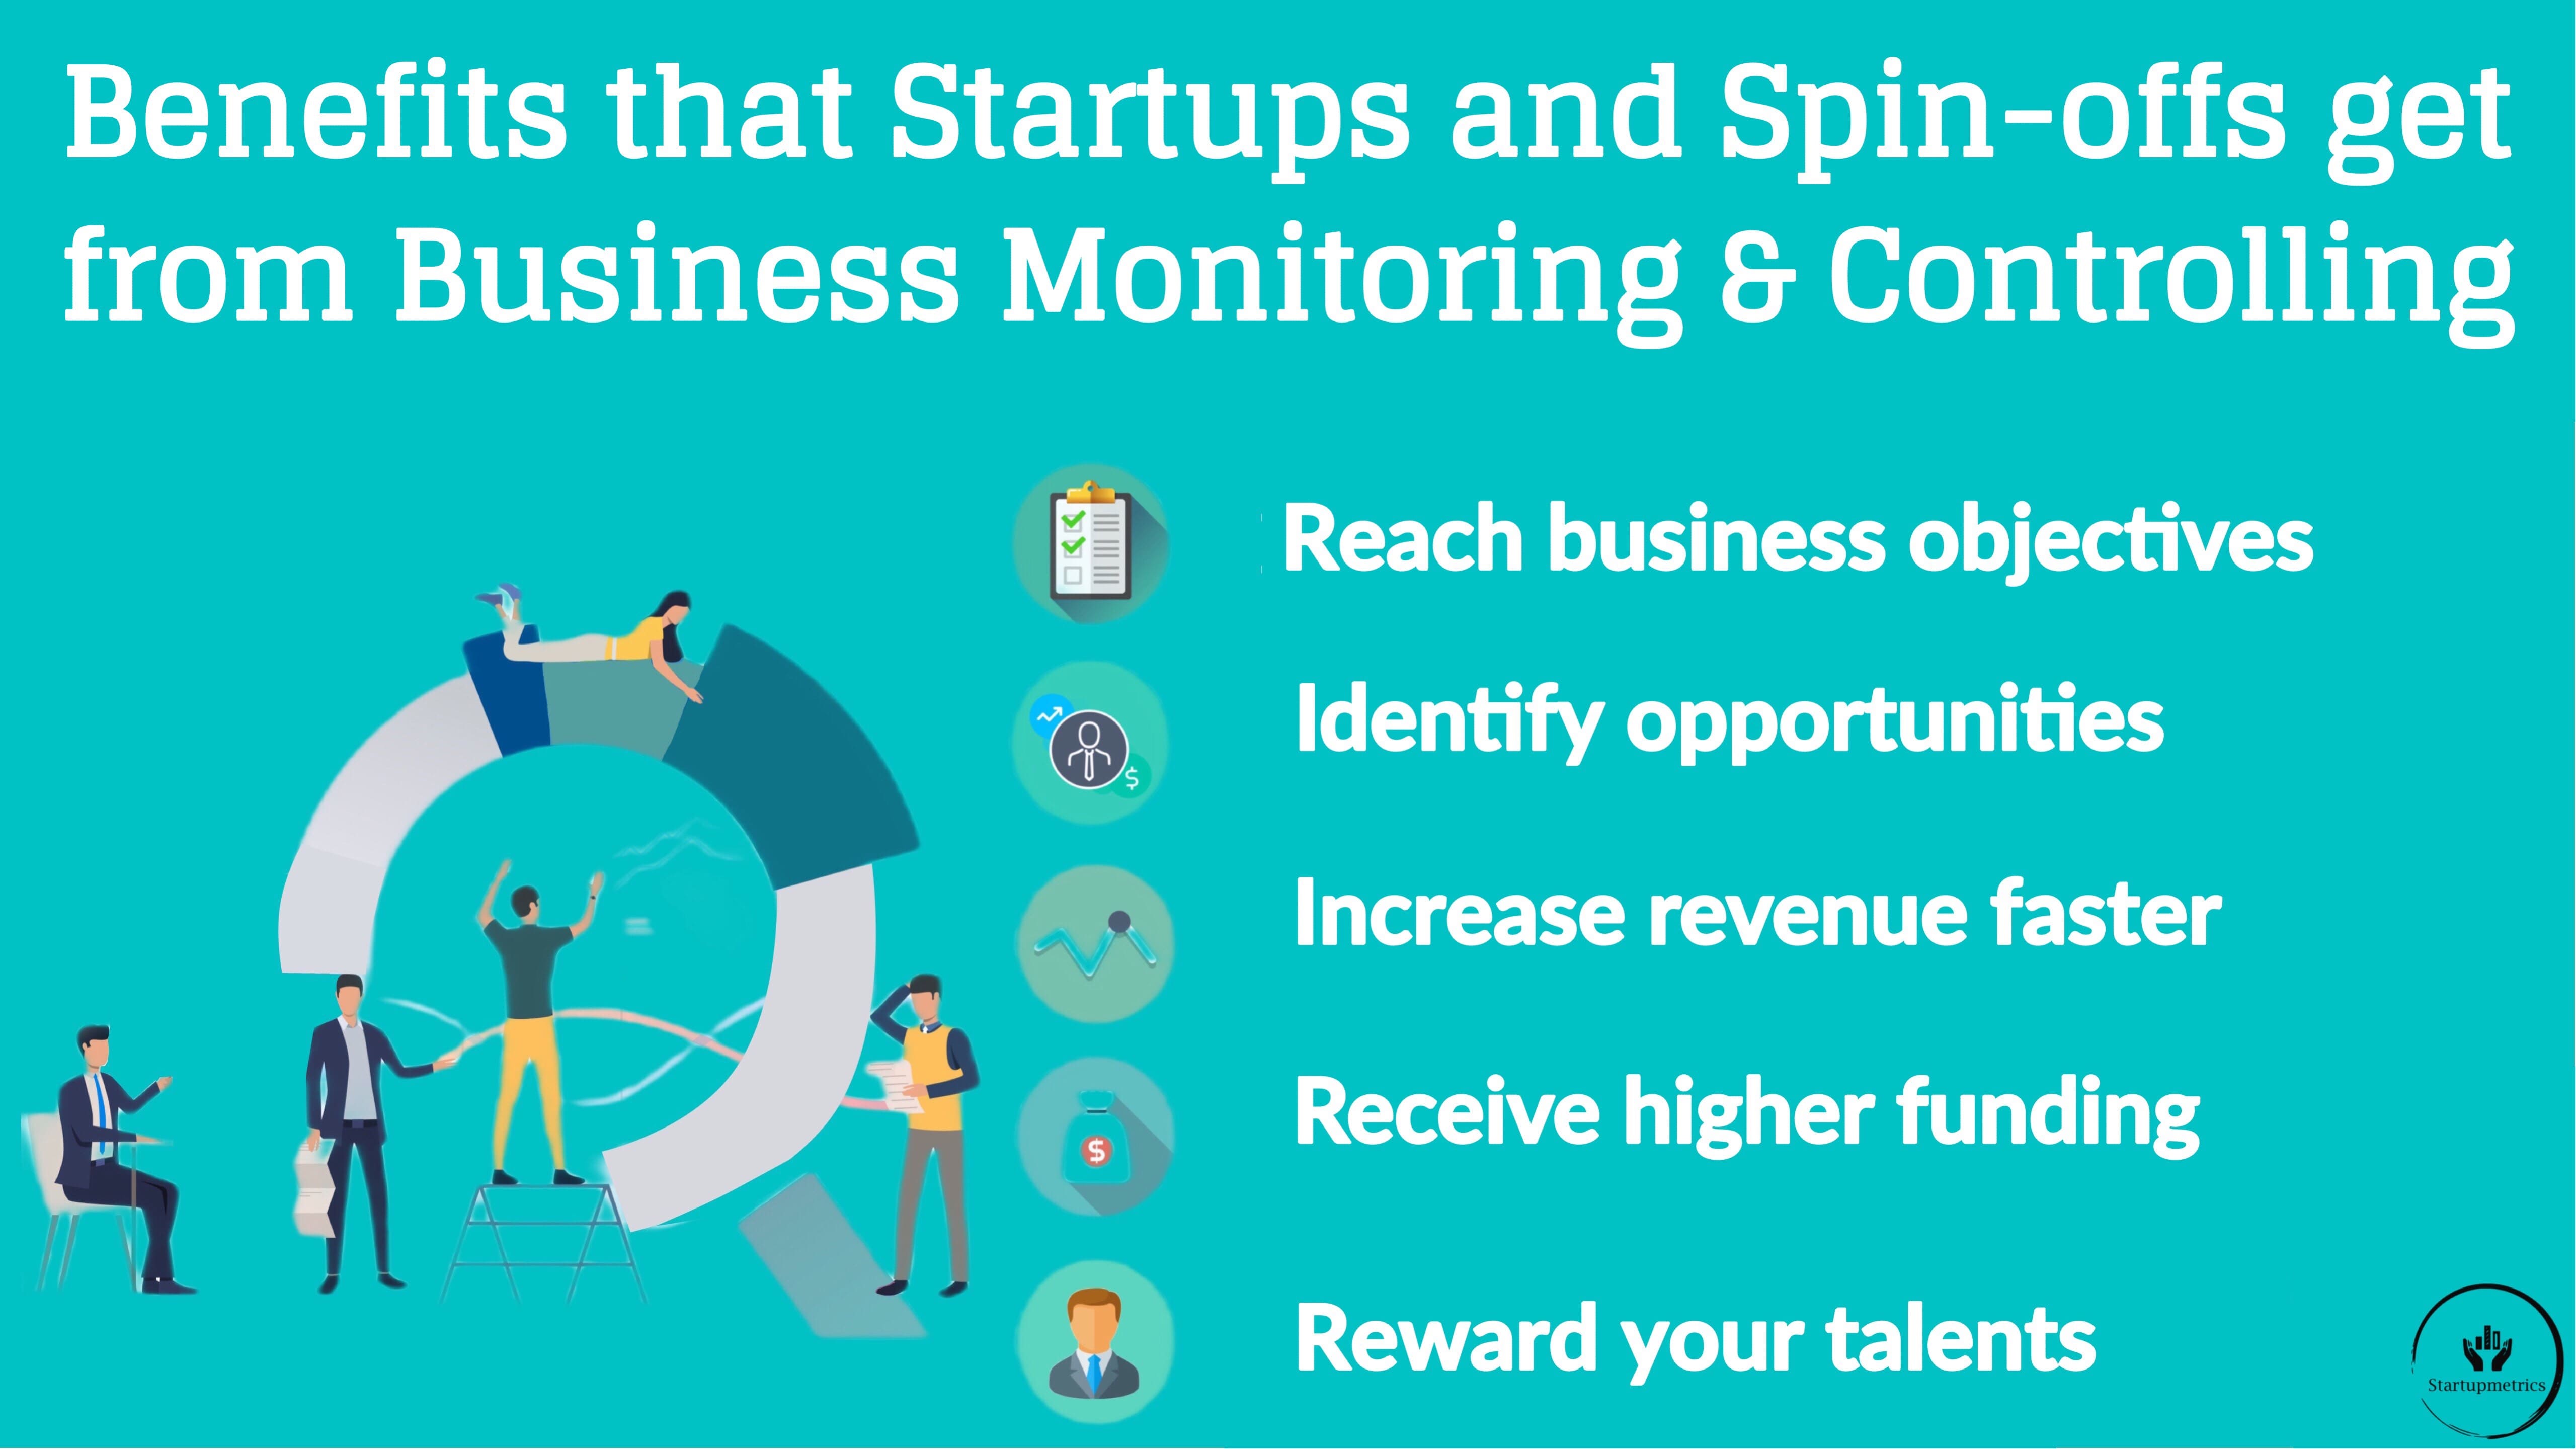 How startups benefit from business activity monitoring and controlling